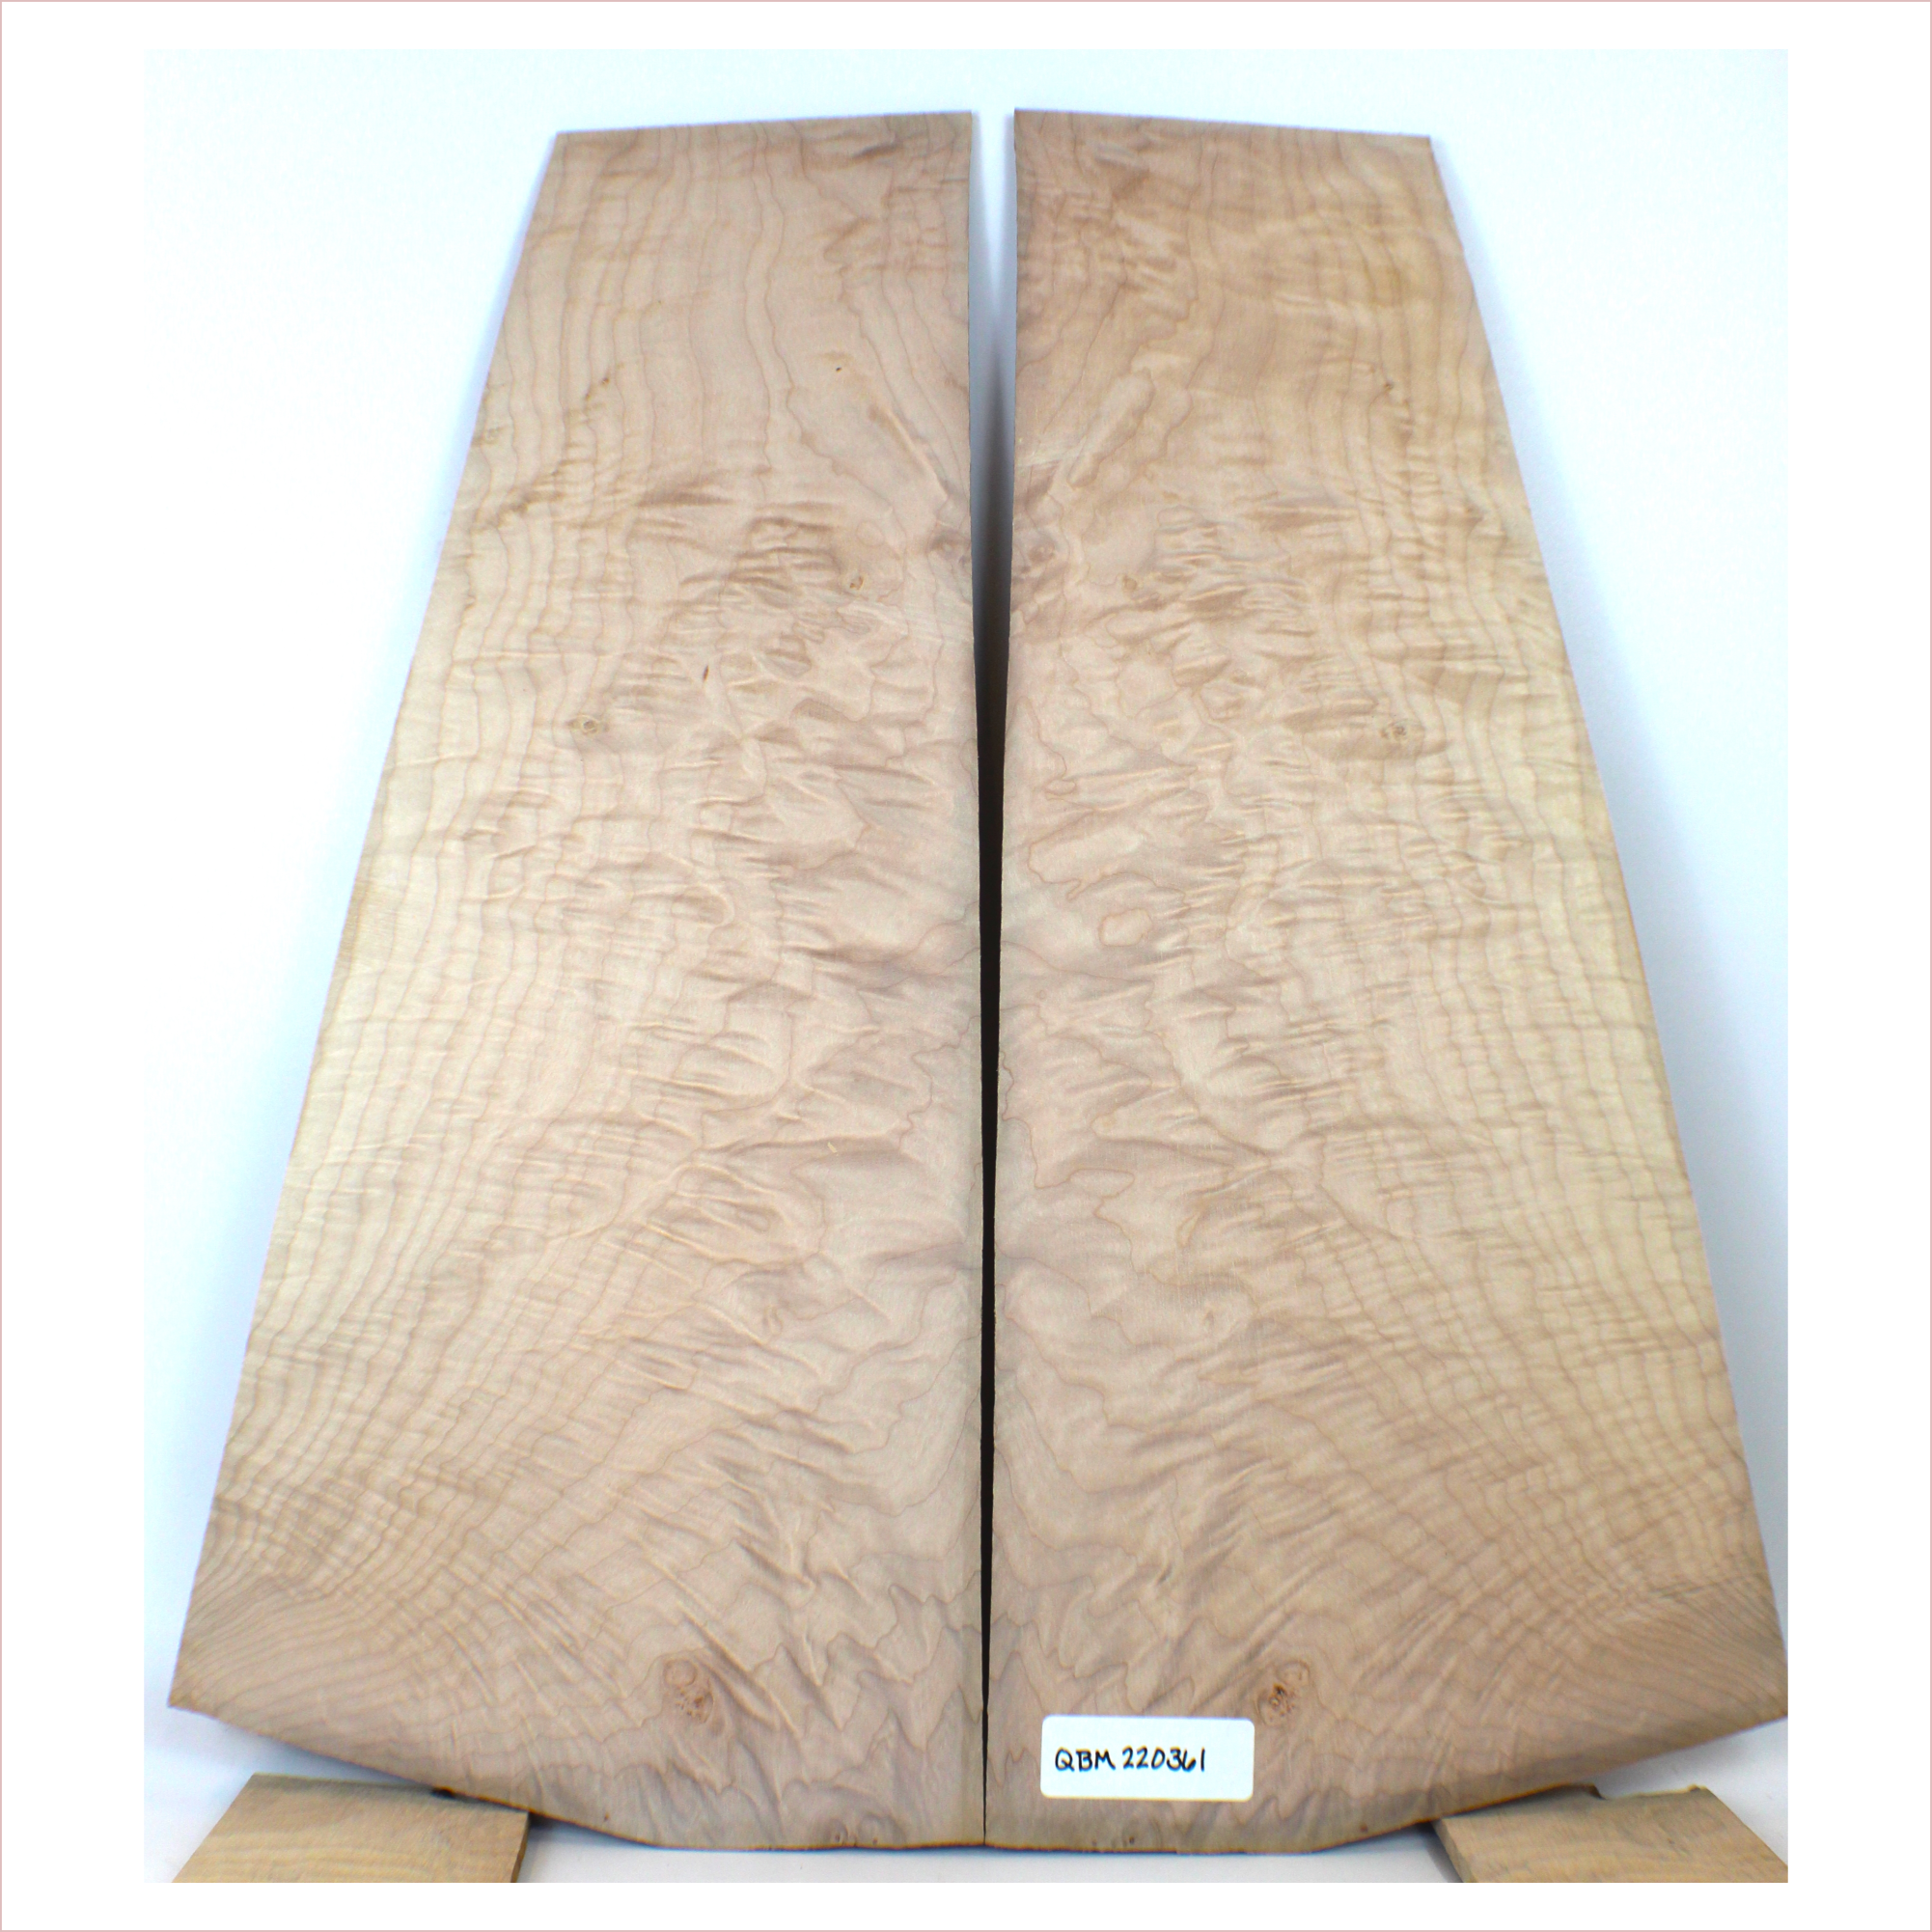 Interesting quilted maple book match with flat-sawn flame figure on the edges.  3A grade figuring and little burls.  This set has been sanded to 400 grit.  Dimensions: Thickness (each piece): .25